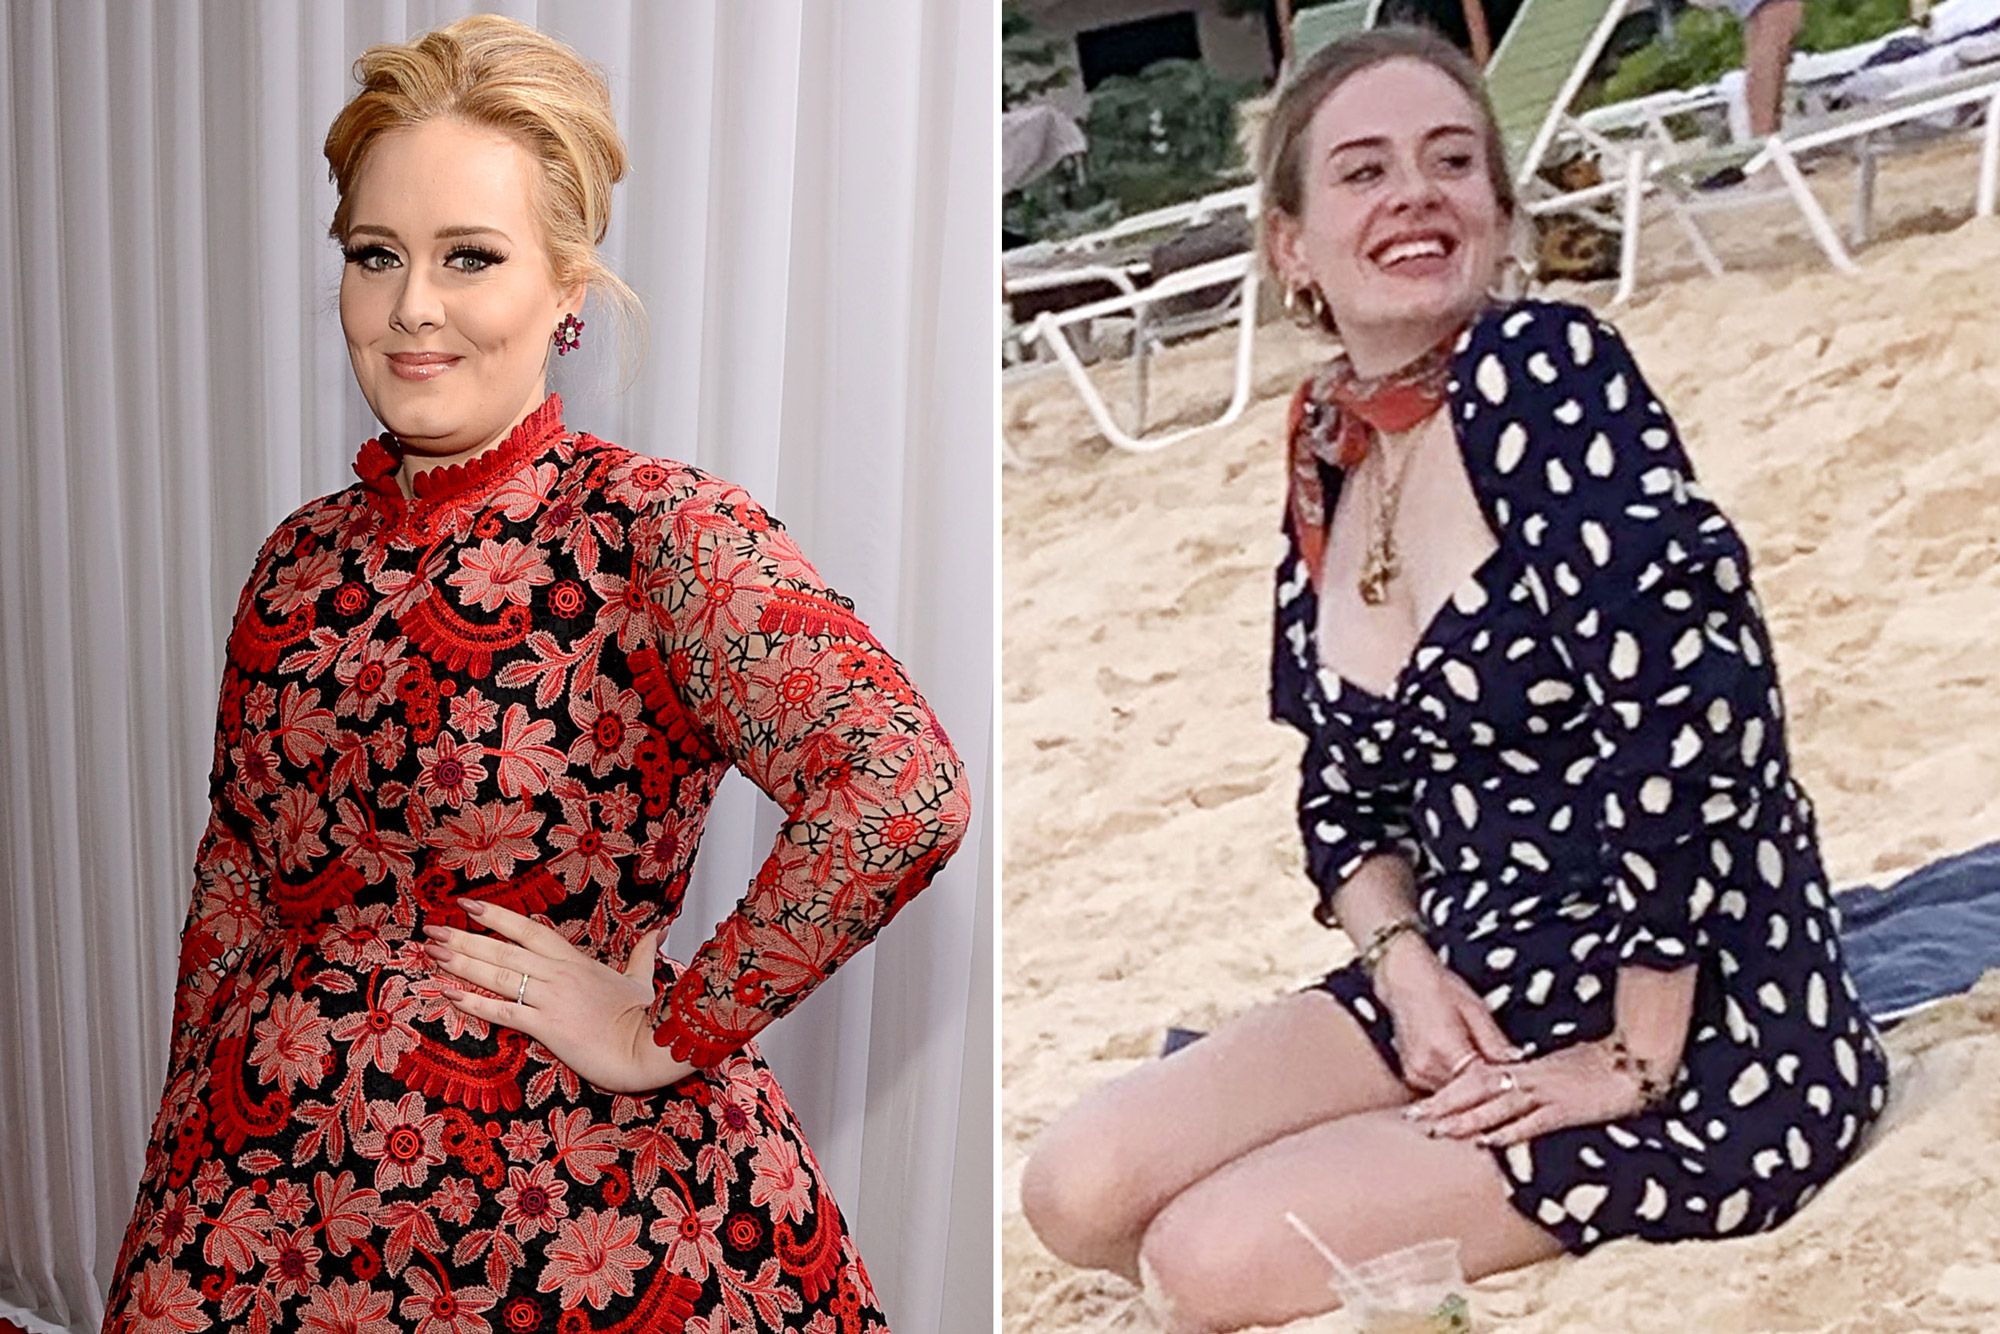 adele-may-tour-again-after-dramatically-losing-45-kg-of-weight-3